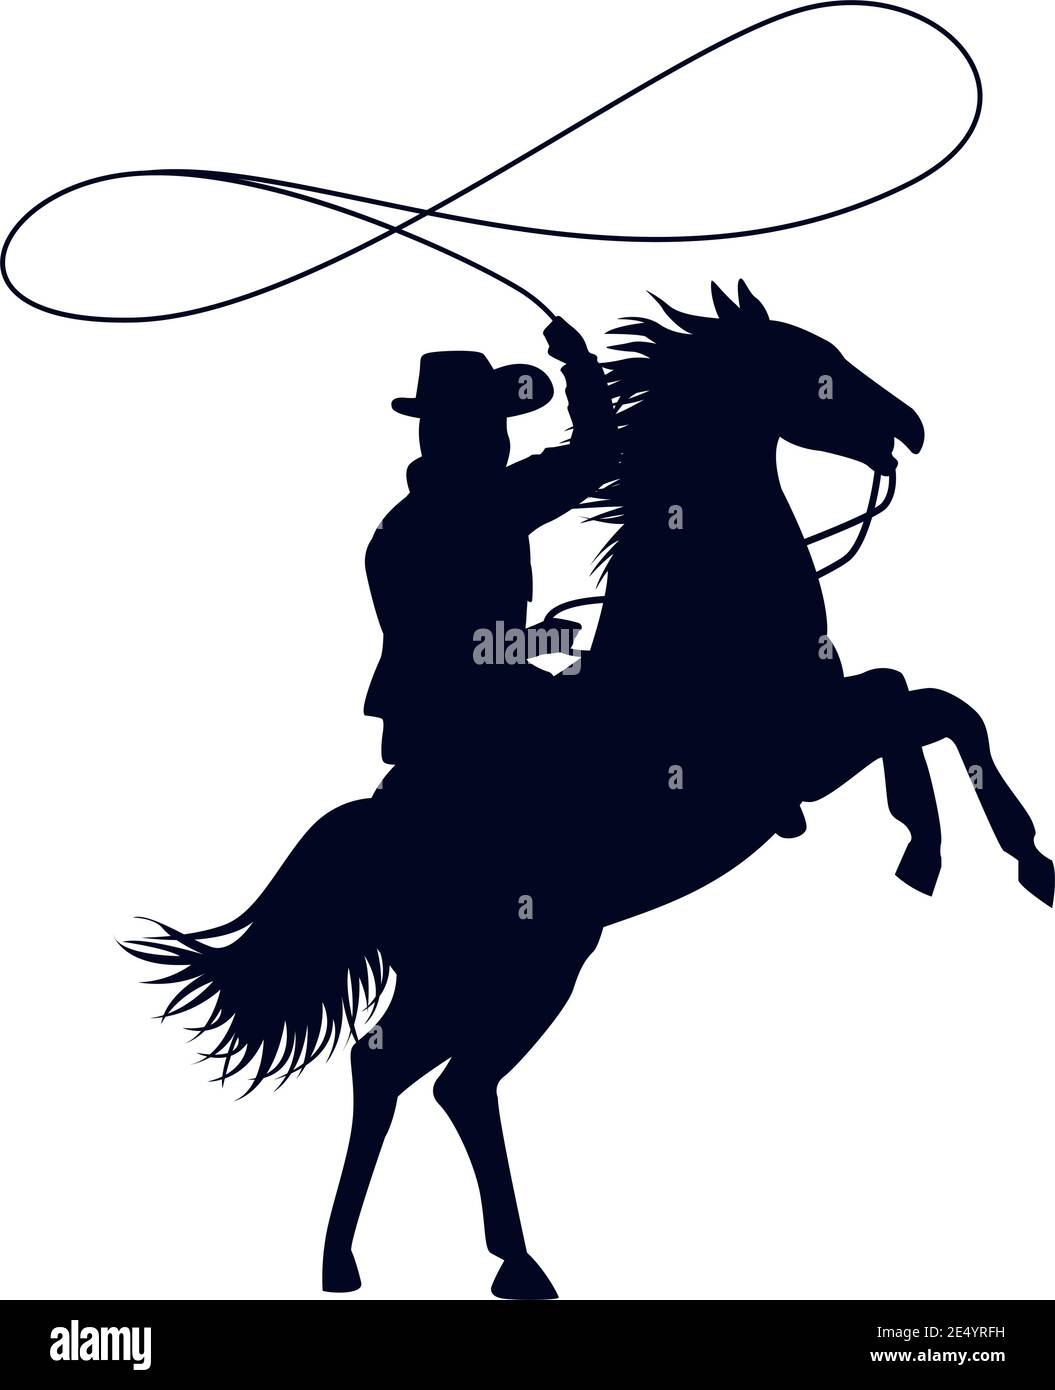 cowboy figure silhouette in horse lassoing character vector illustration design Stock Vector